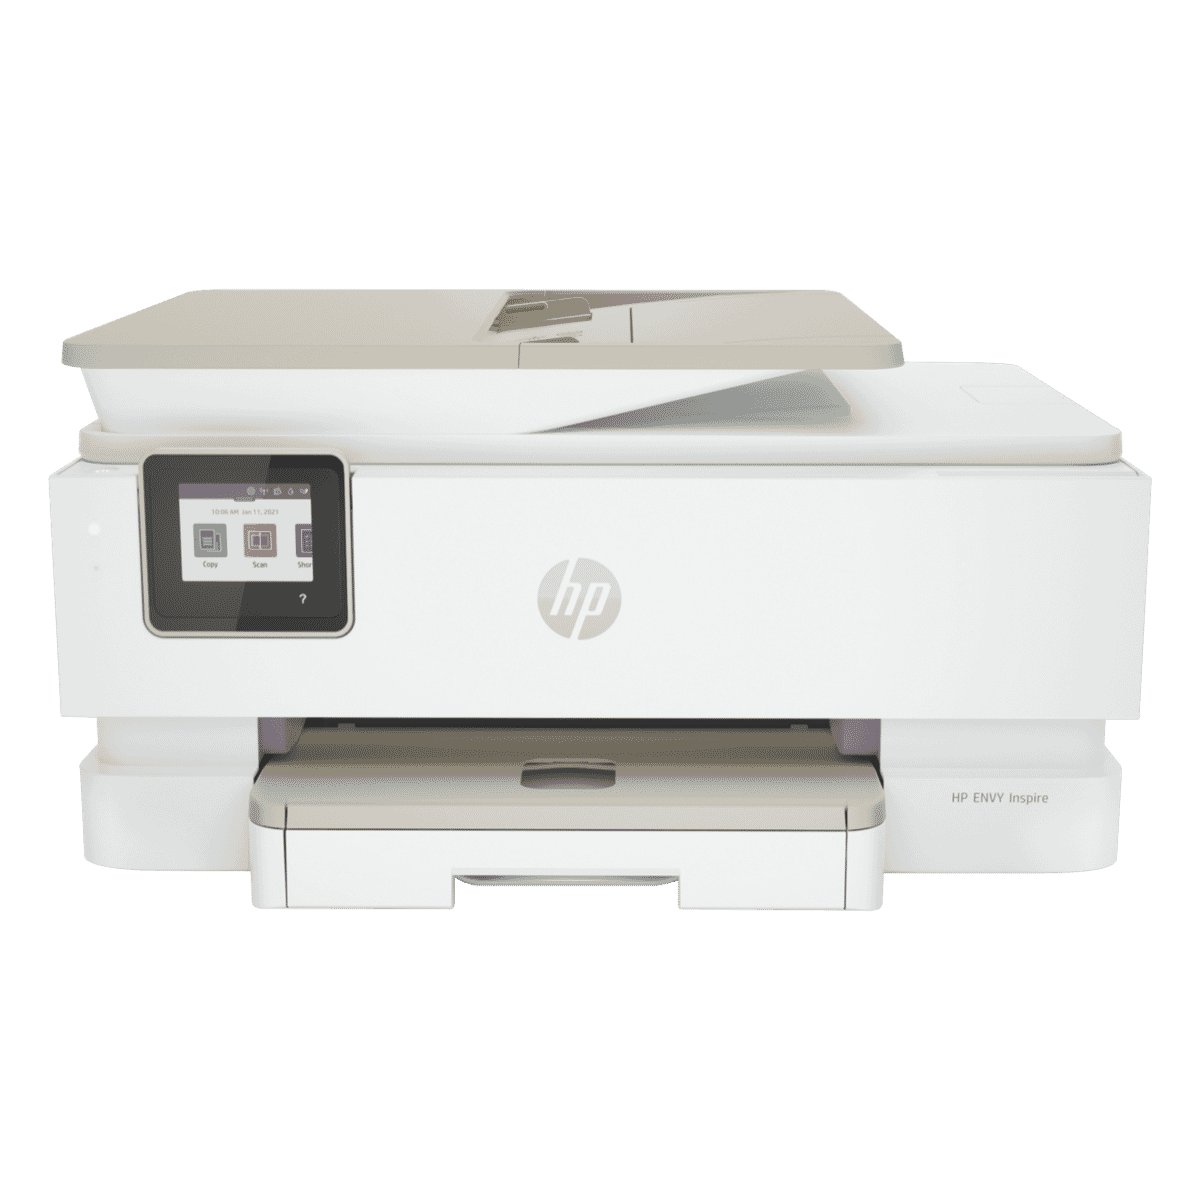 HP Envy Inspire 7220e Multifunction Printer Inkjet Printer 9 Months Free  Print with HP Instant Ink Included HP+ Print Scan Copy Photo Print A4 WiFi  Airprint : : Computers & Accessories